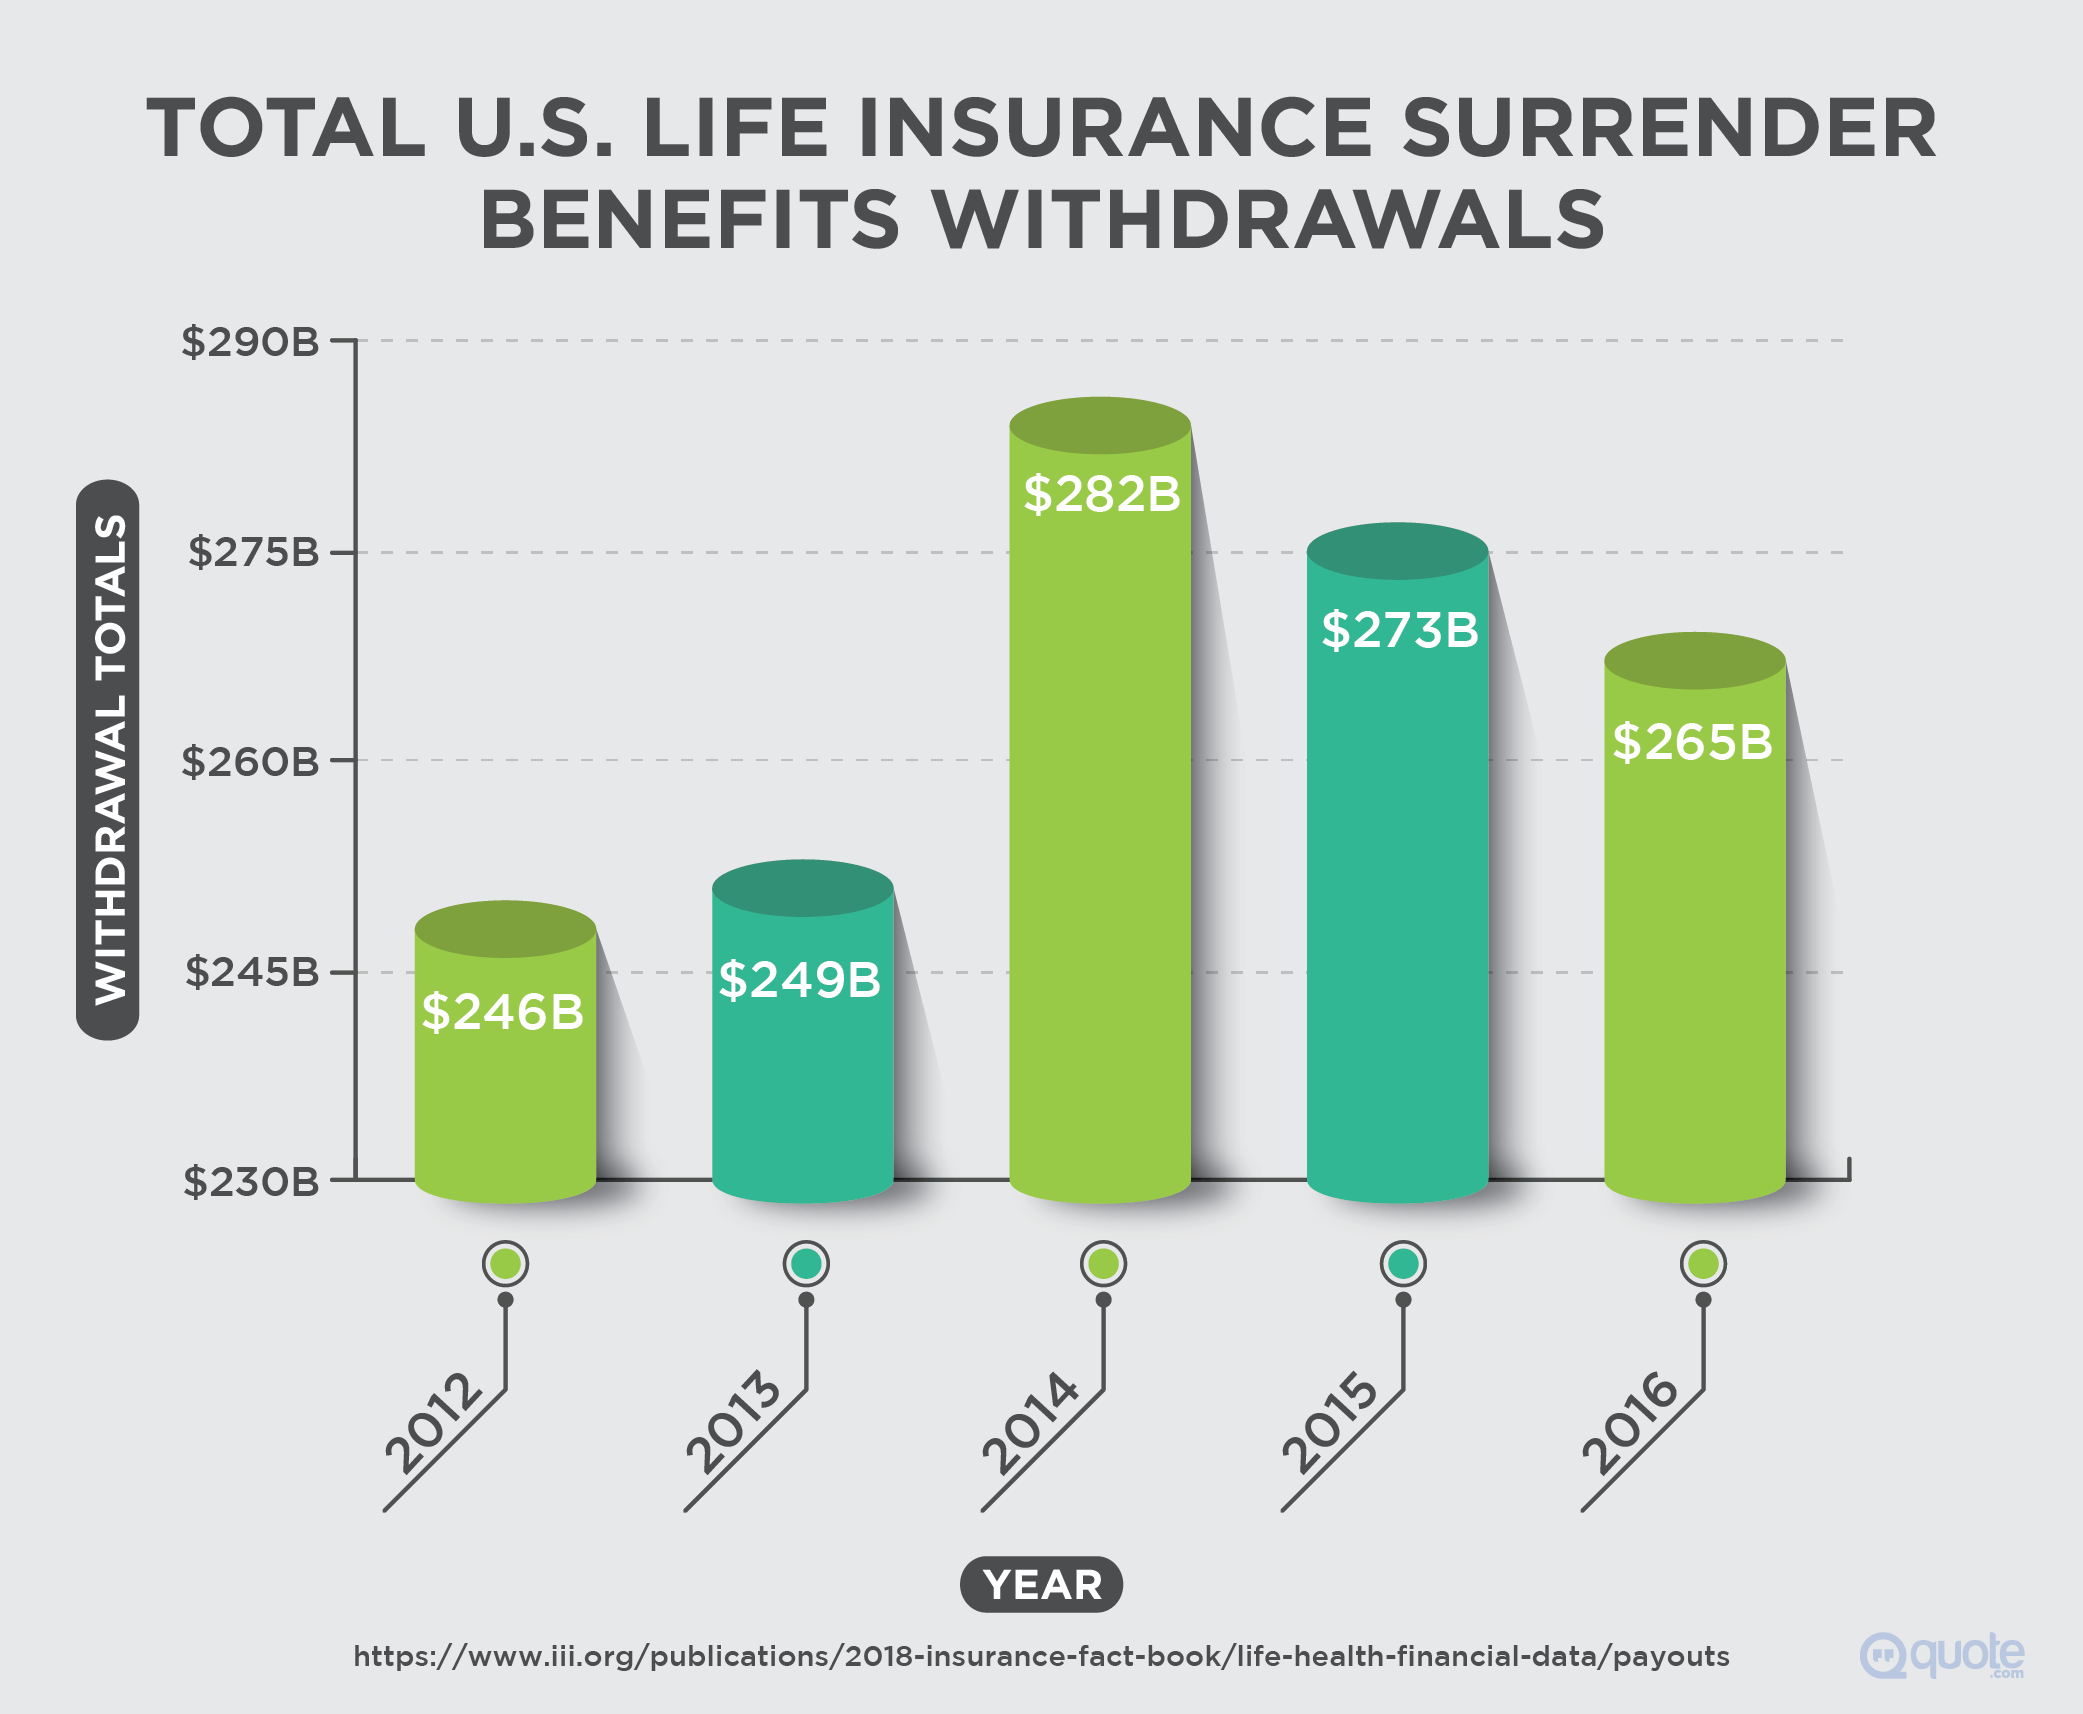 Total U.S. Life Insurance Surrender Benefits Withdrawals from 2012-2016